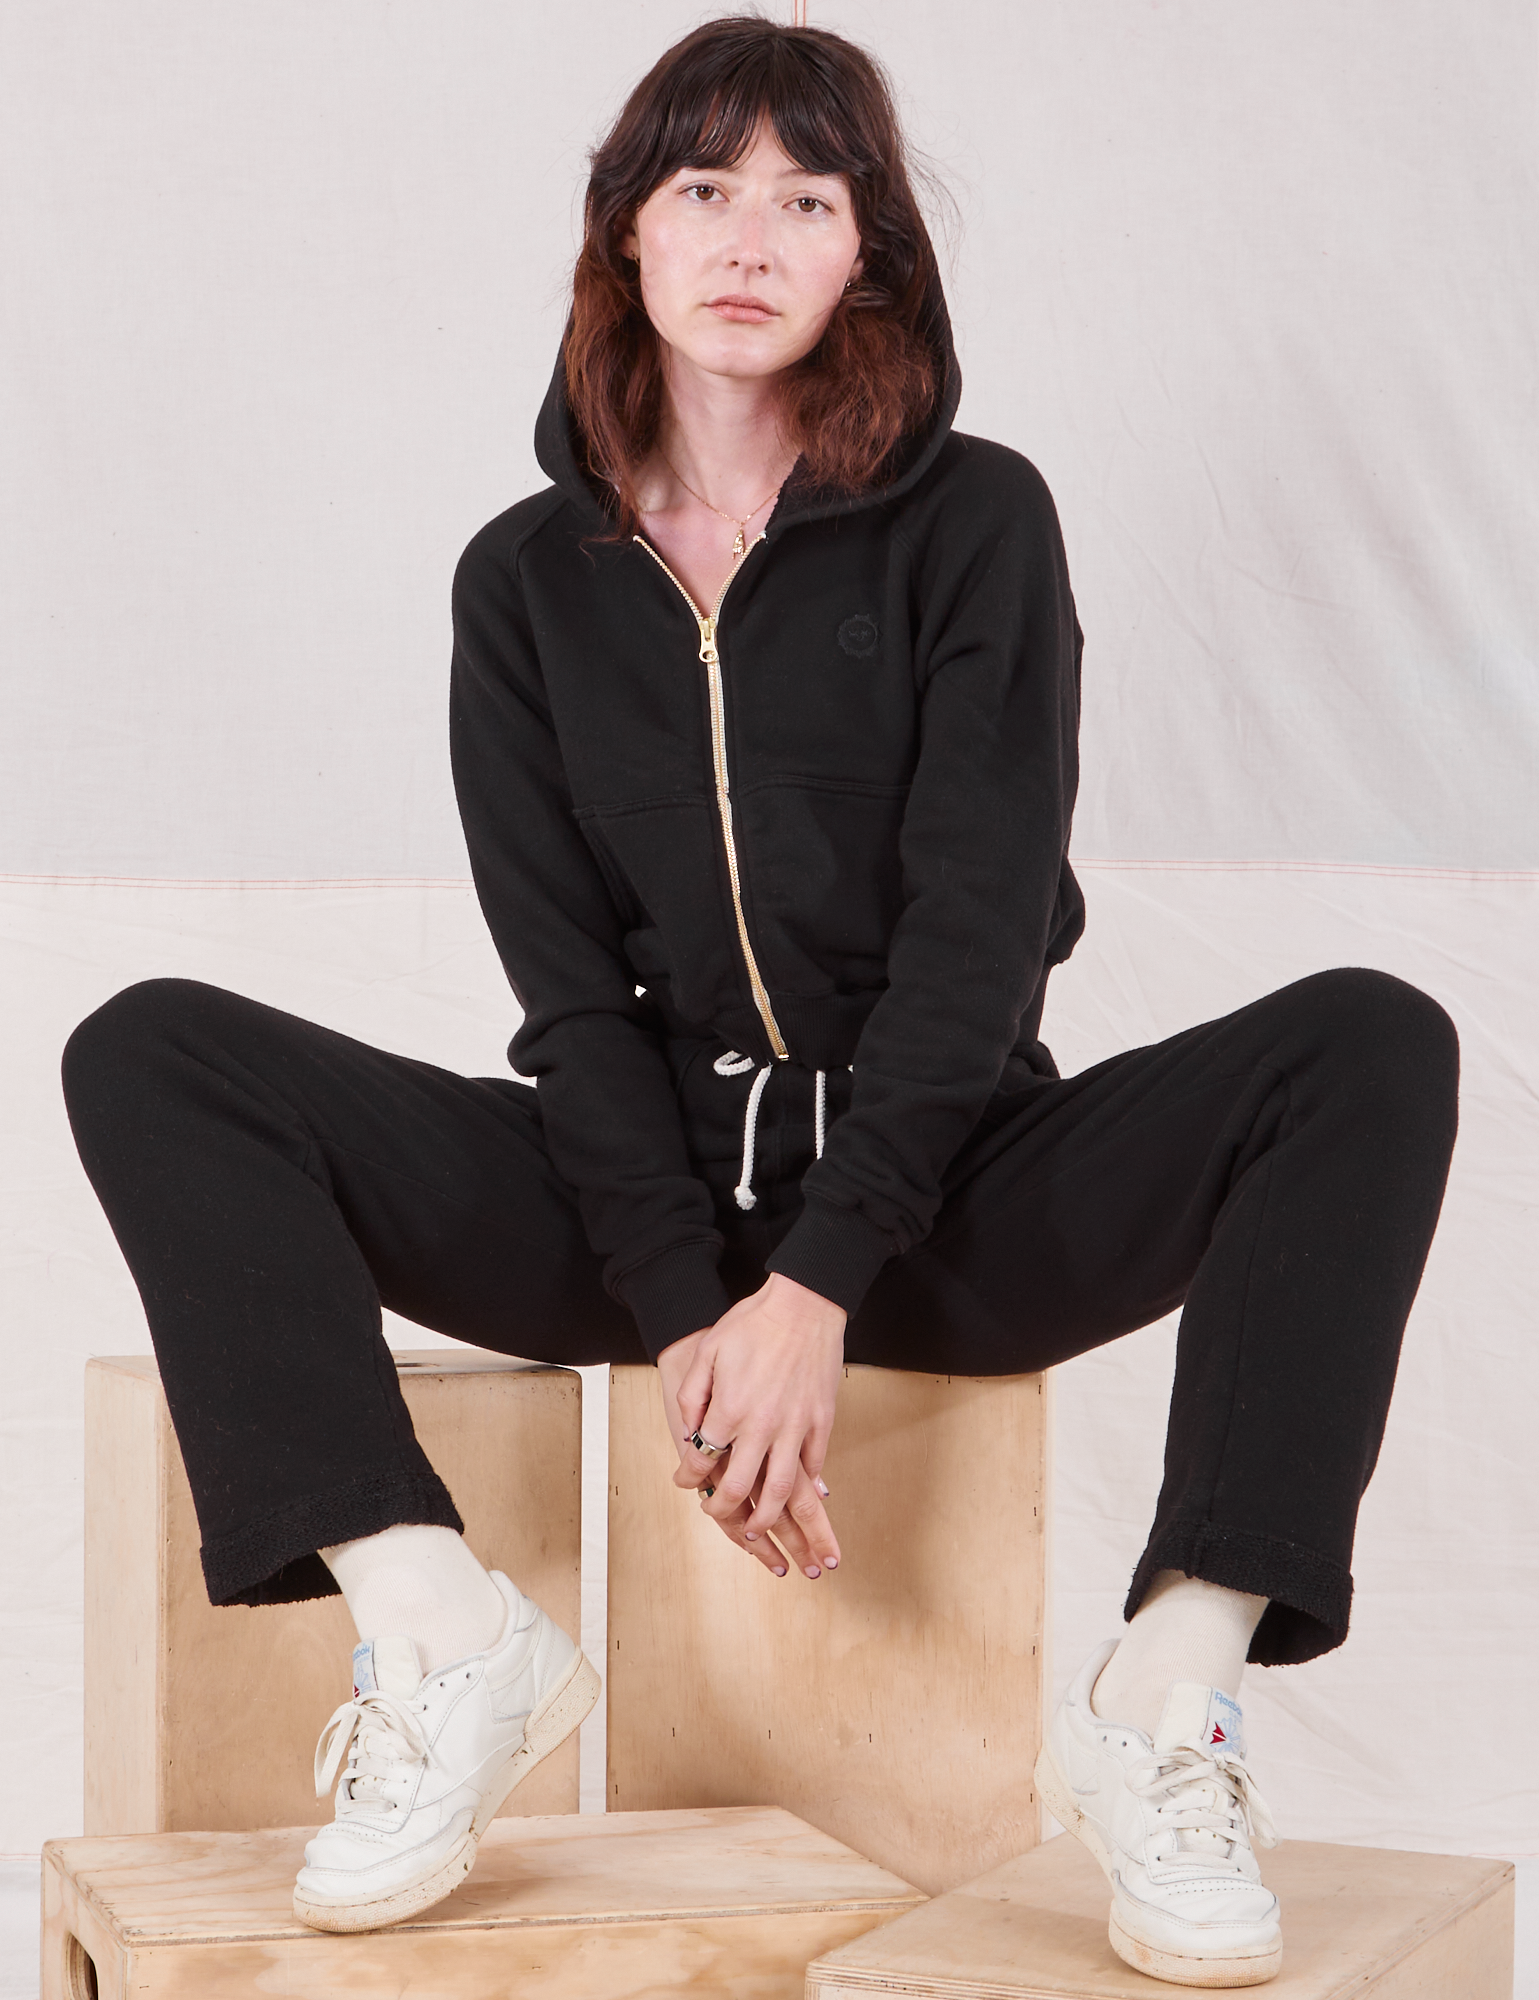 Alex is wearing Rolled Cuff Sweat Pants in Basic Black and matching Cropped Zip Hoodie